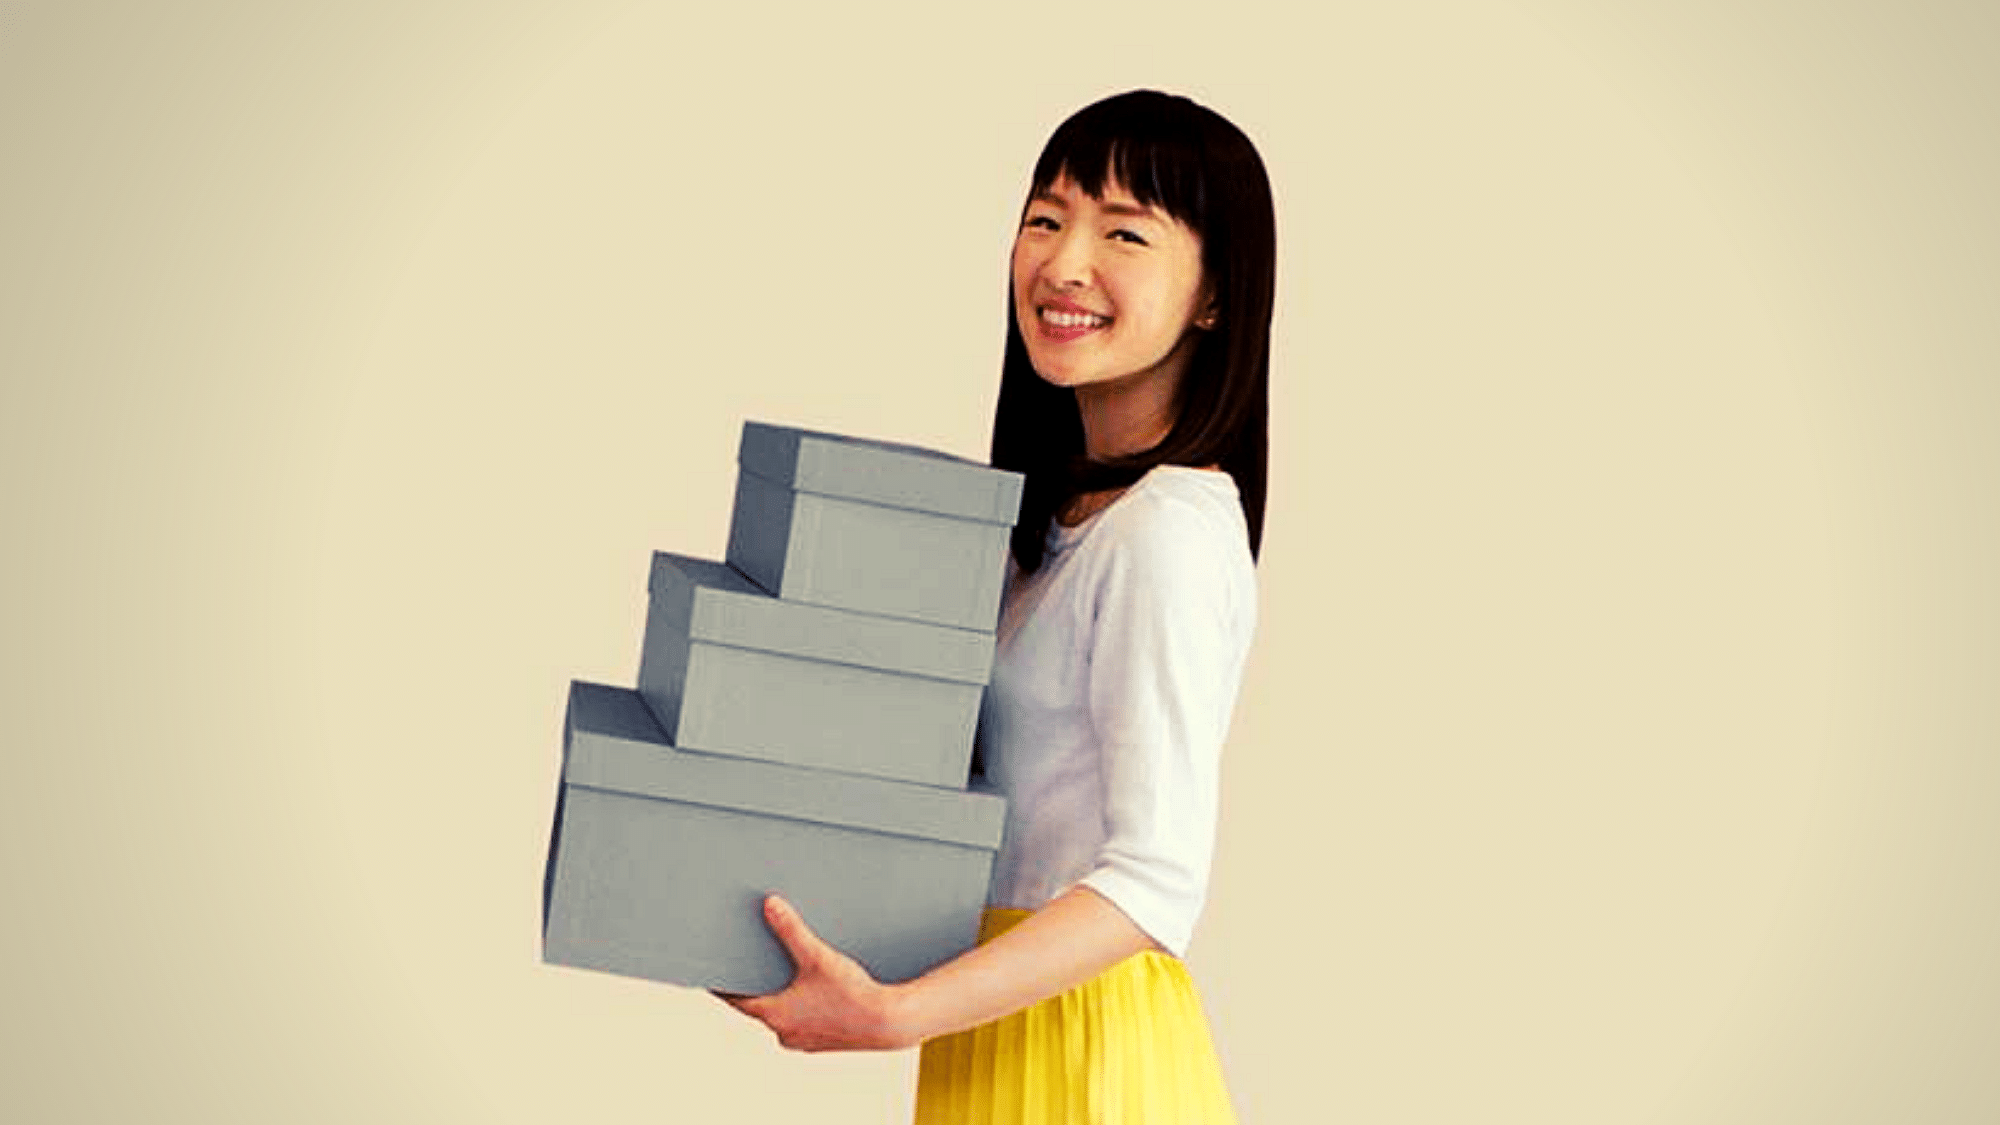 Marie Kondo is the star of the Netflix show.